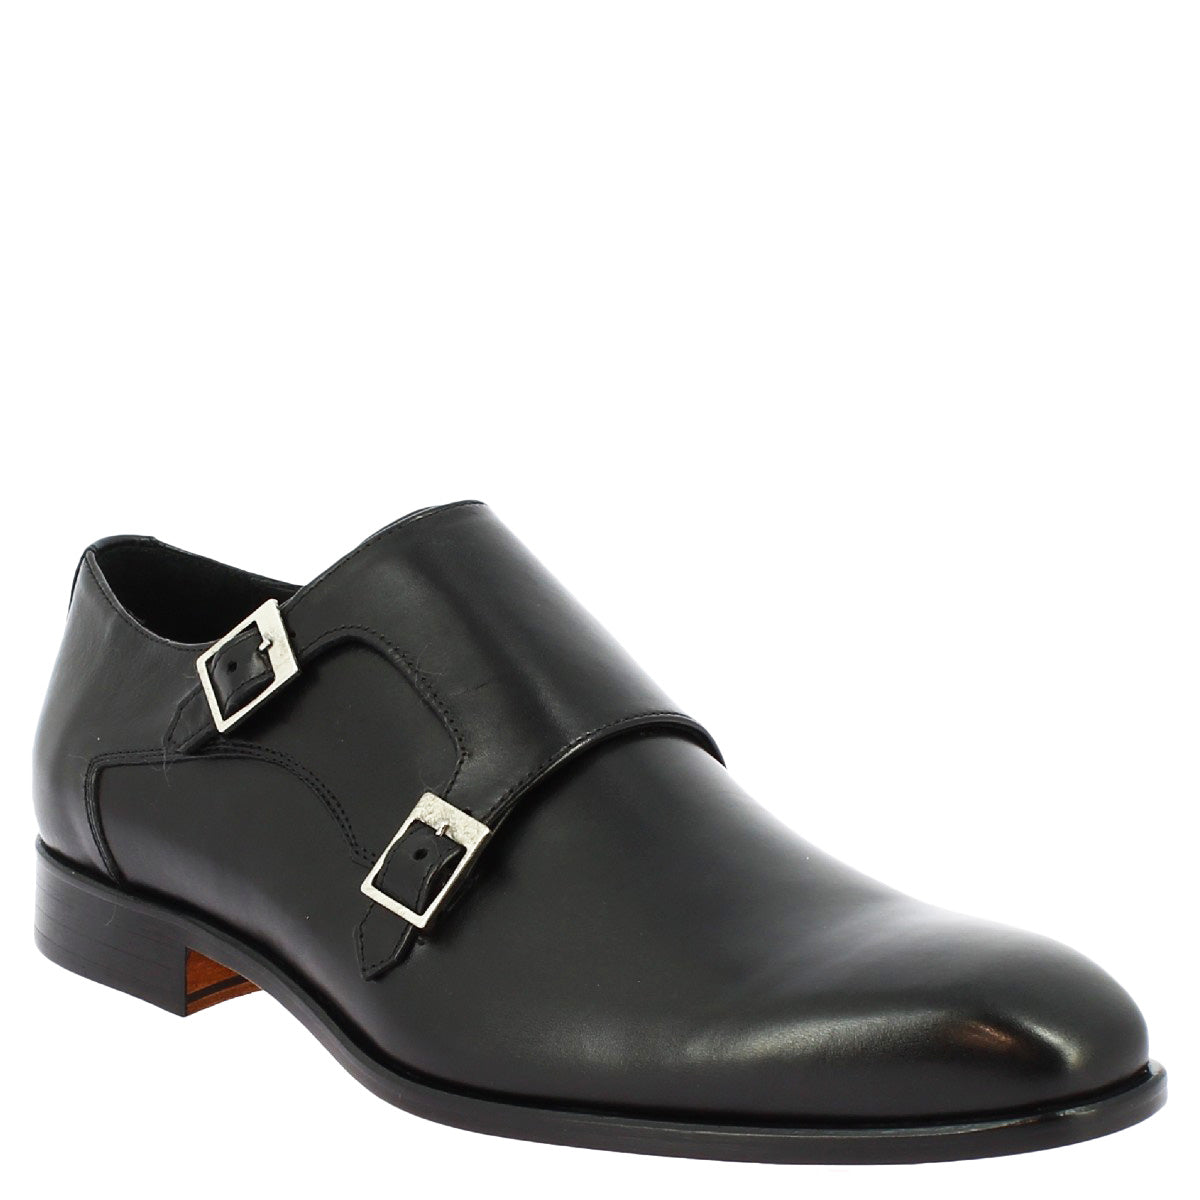 Men's shoes with handmade buckles in black calf leather